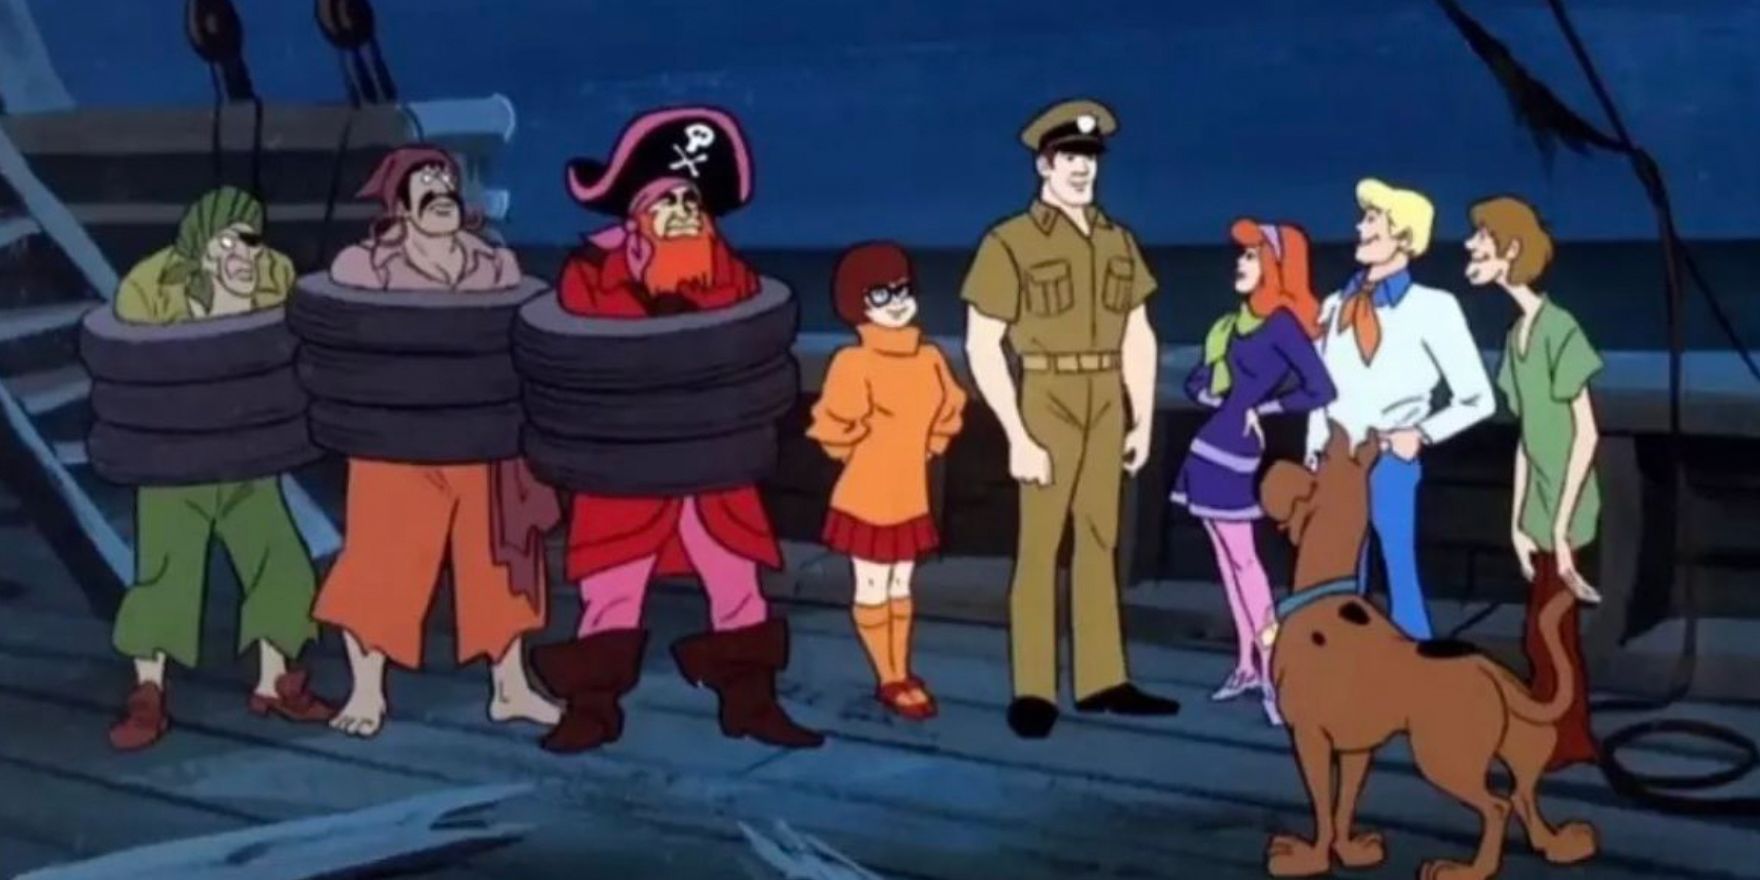 The Scooby gang catches Redbeard and his pirates in the Scooby-Doo episode Go Away Ghost Ship